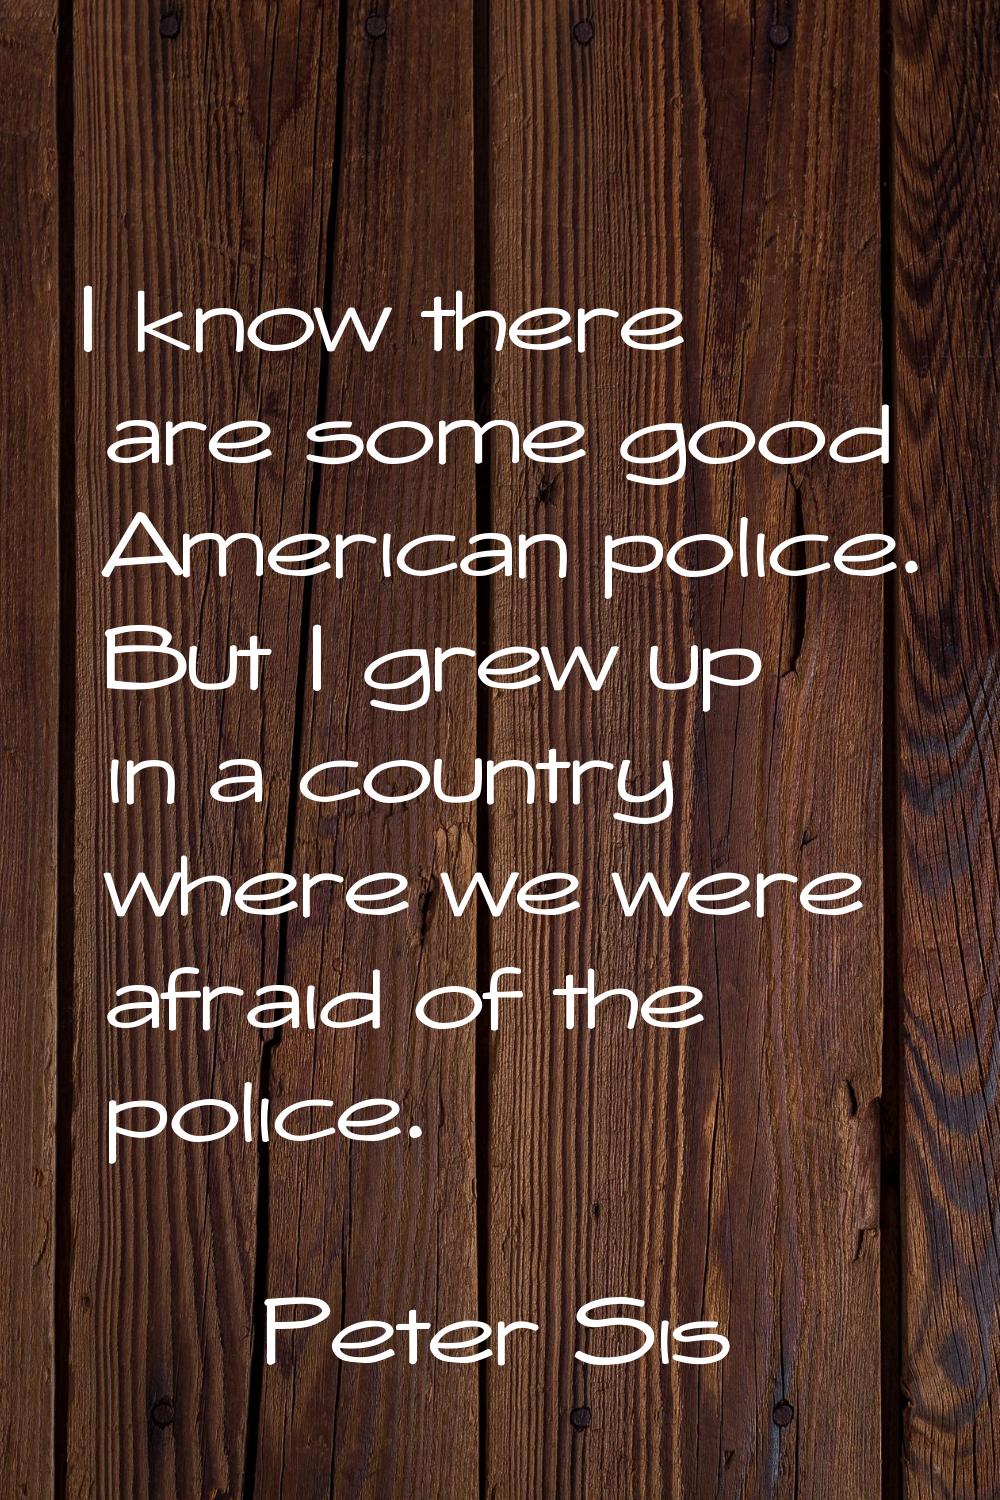 I know there are some good American police. But I grew up in a country where we were afraid of the 